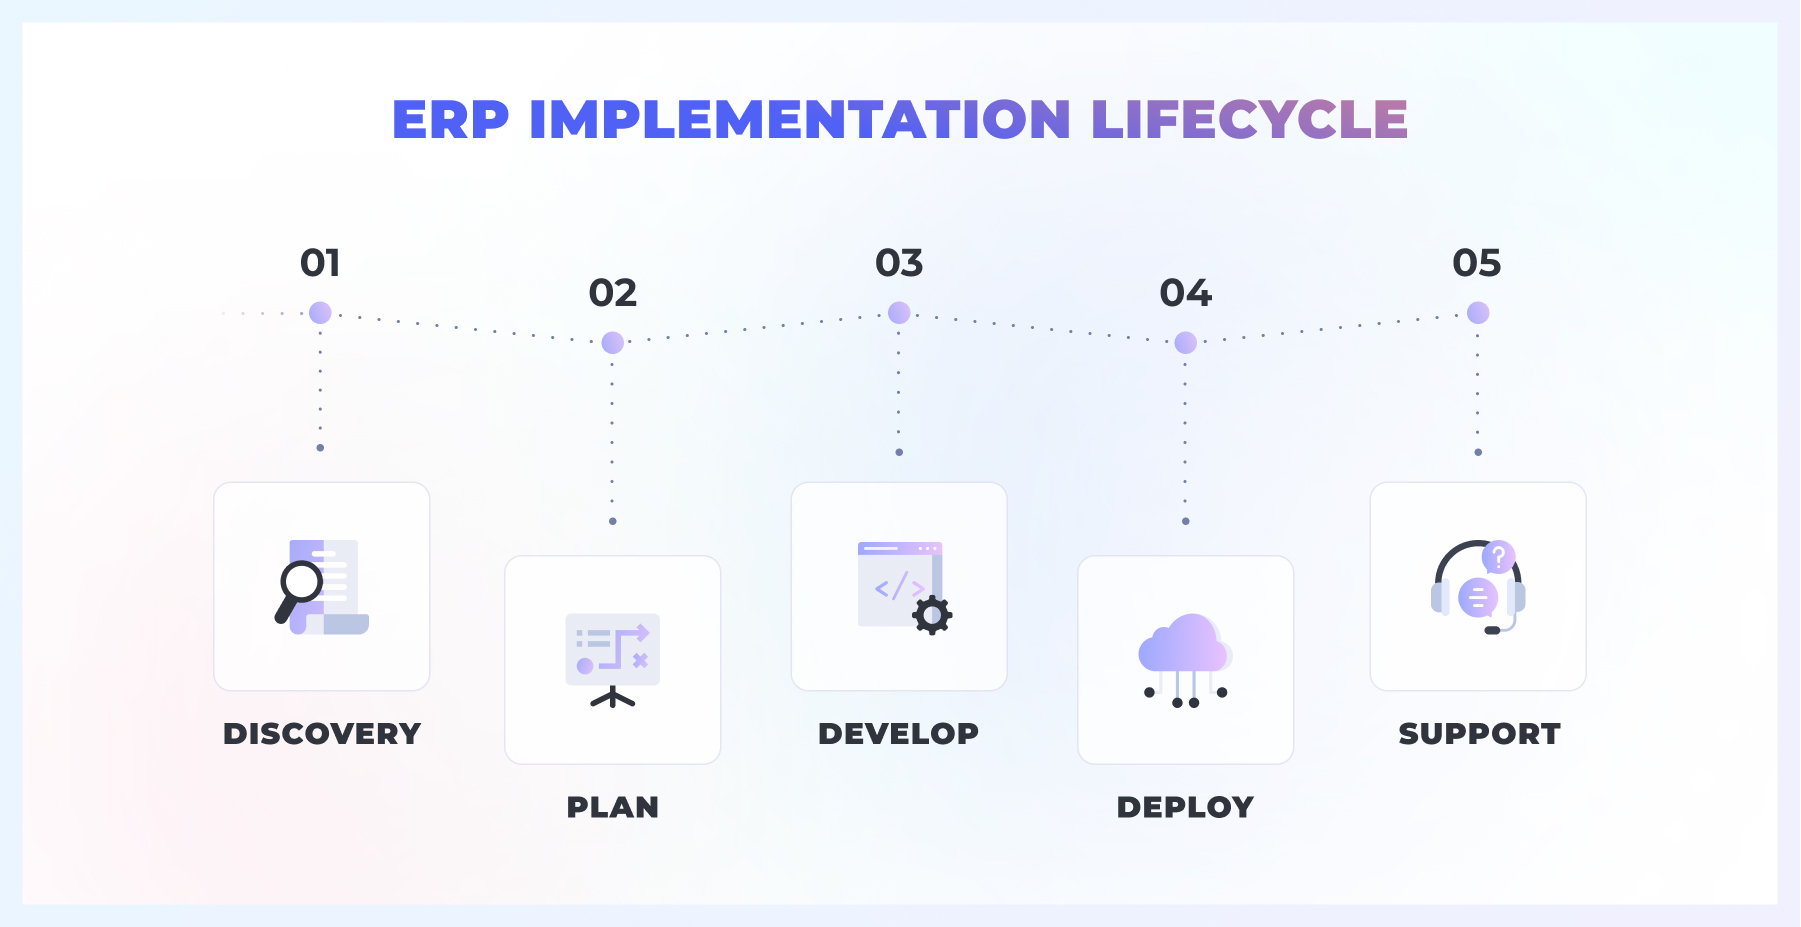 ERP implementation lifecycle